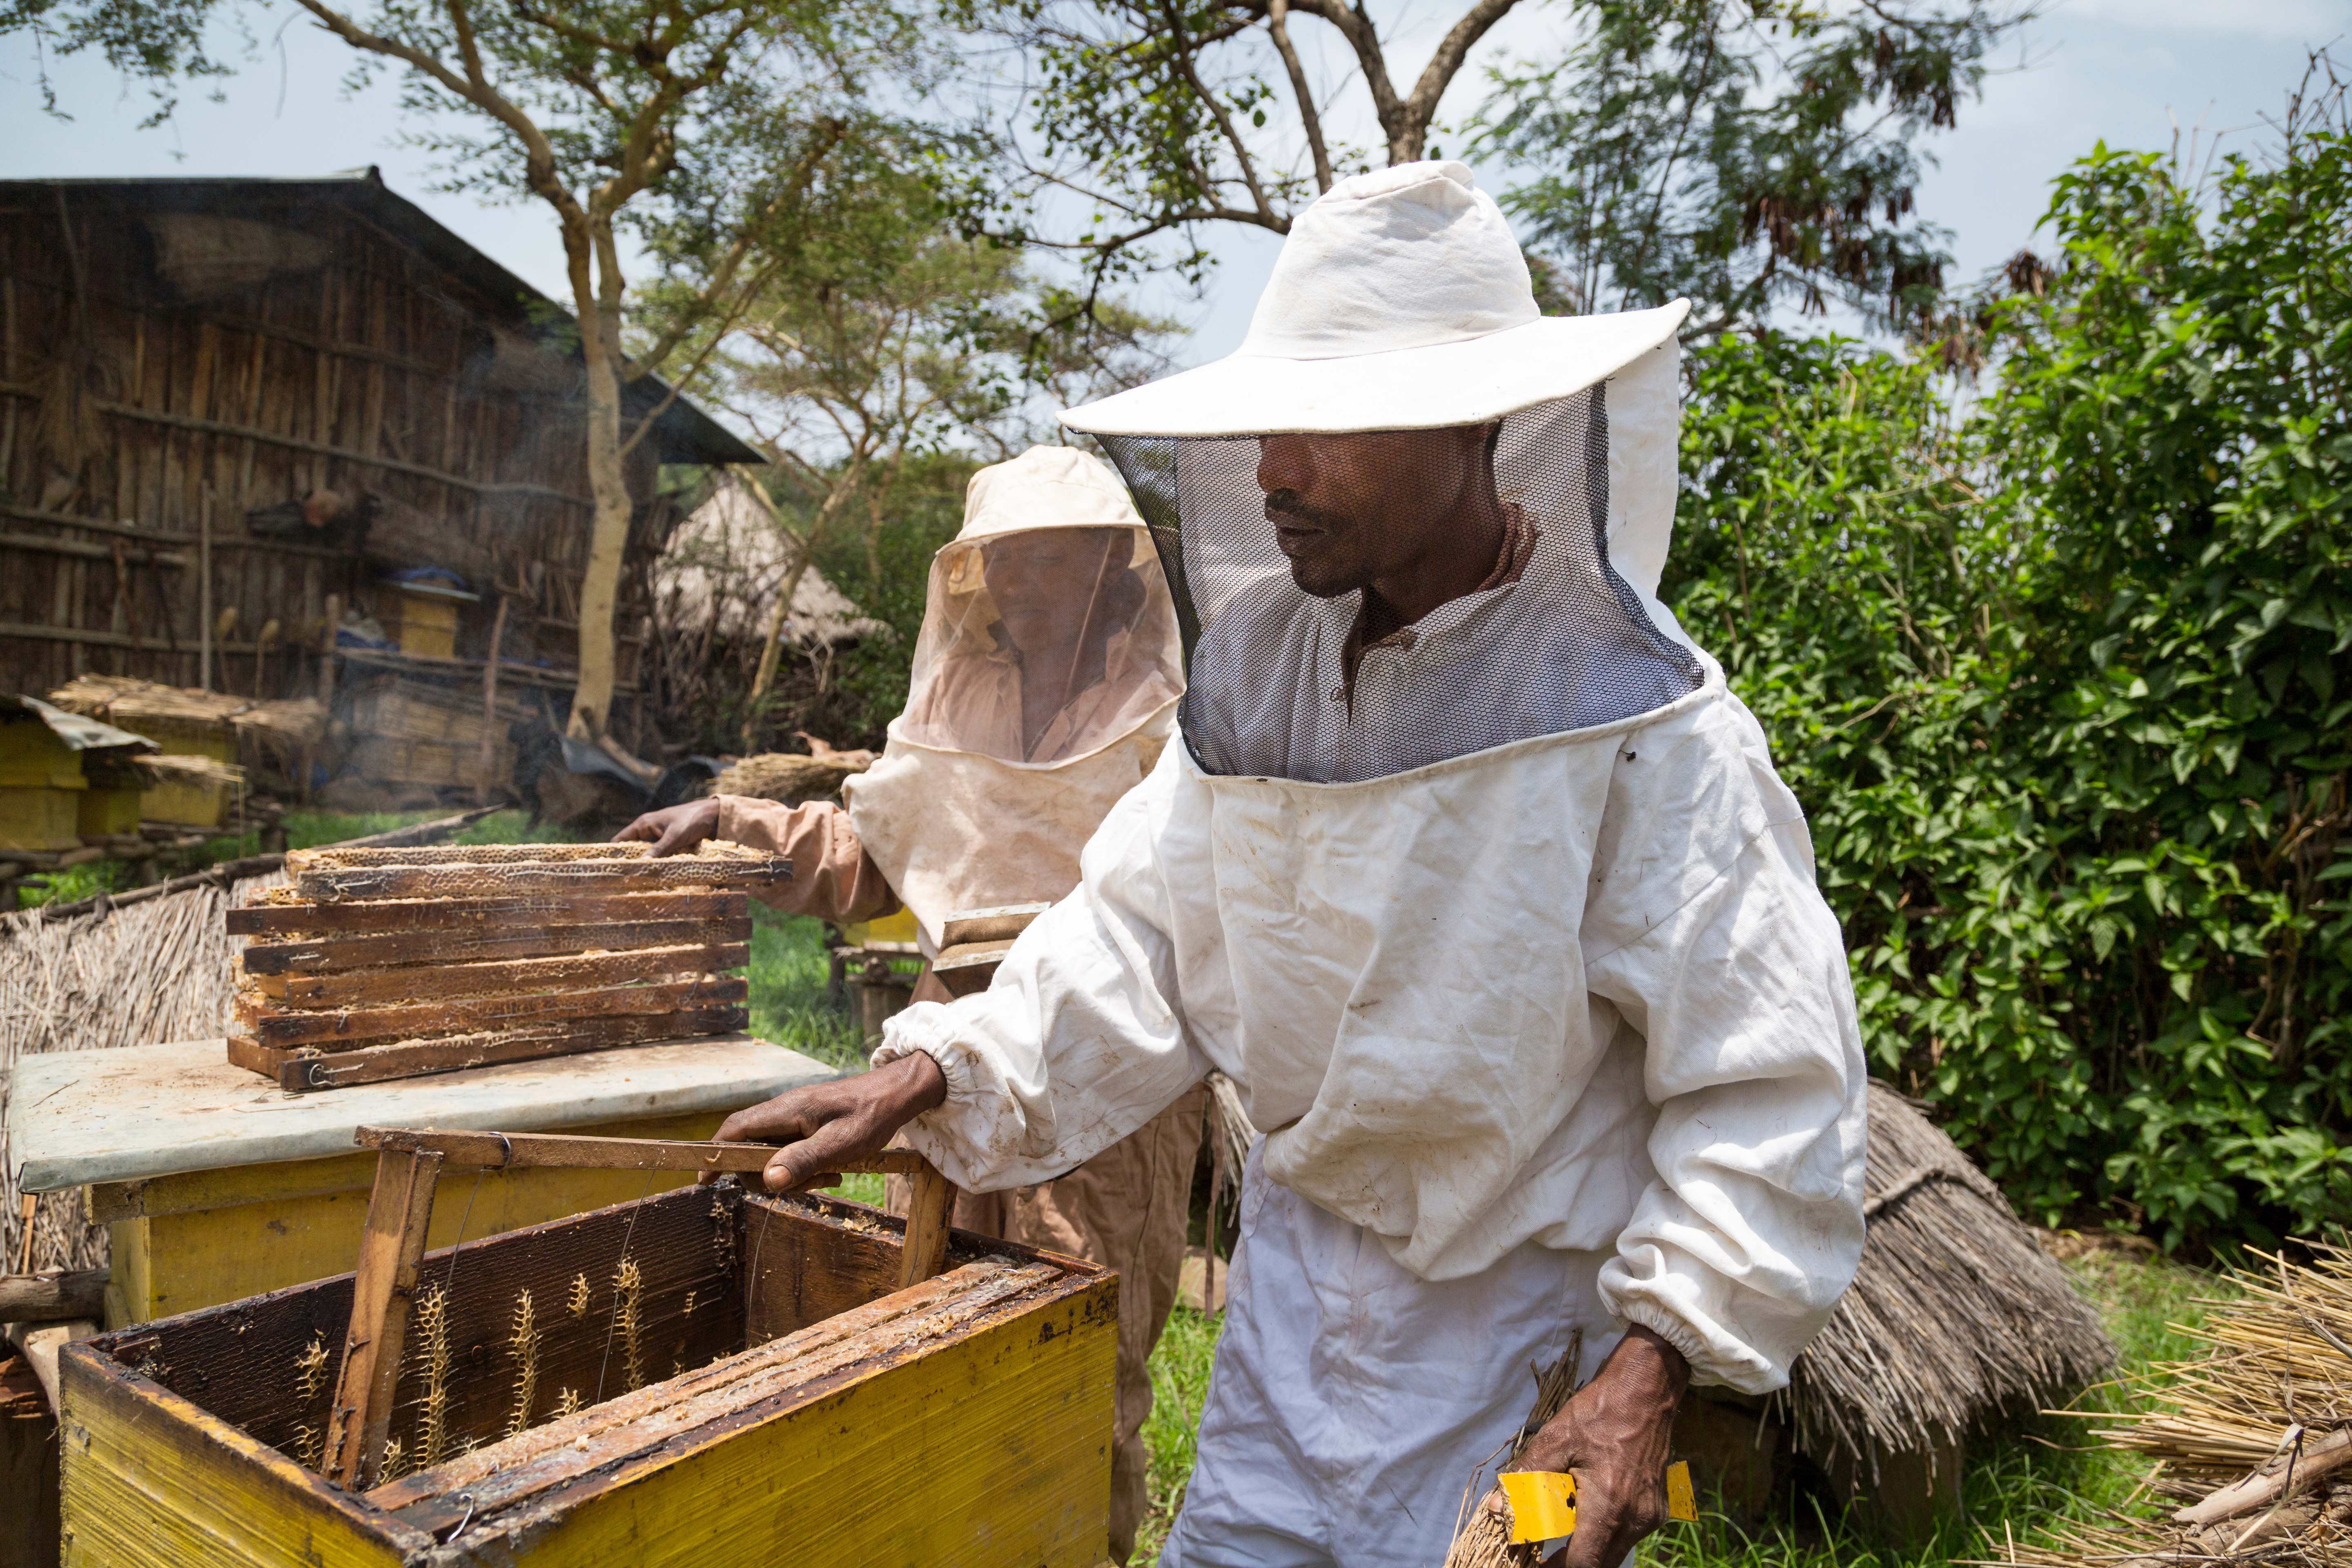 YEFAG KEBELE, LIBO KEMKEM WOREDA, AMHARA Abebaw Melesew and his wife Abay Desalegn work on their hives. Abebaw used the training he received from GRAD to turn around his beekeeping business. He is now a Model Farmer, training others to succeed in honey production.